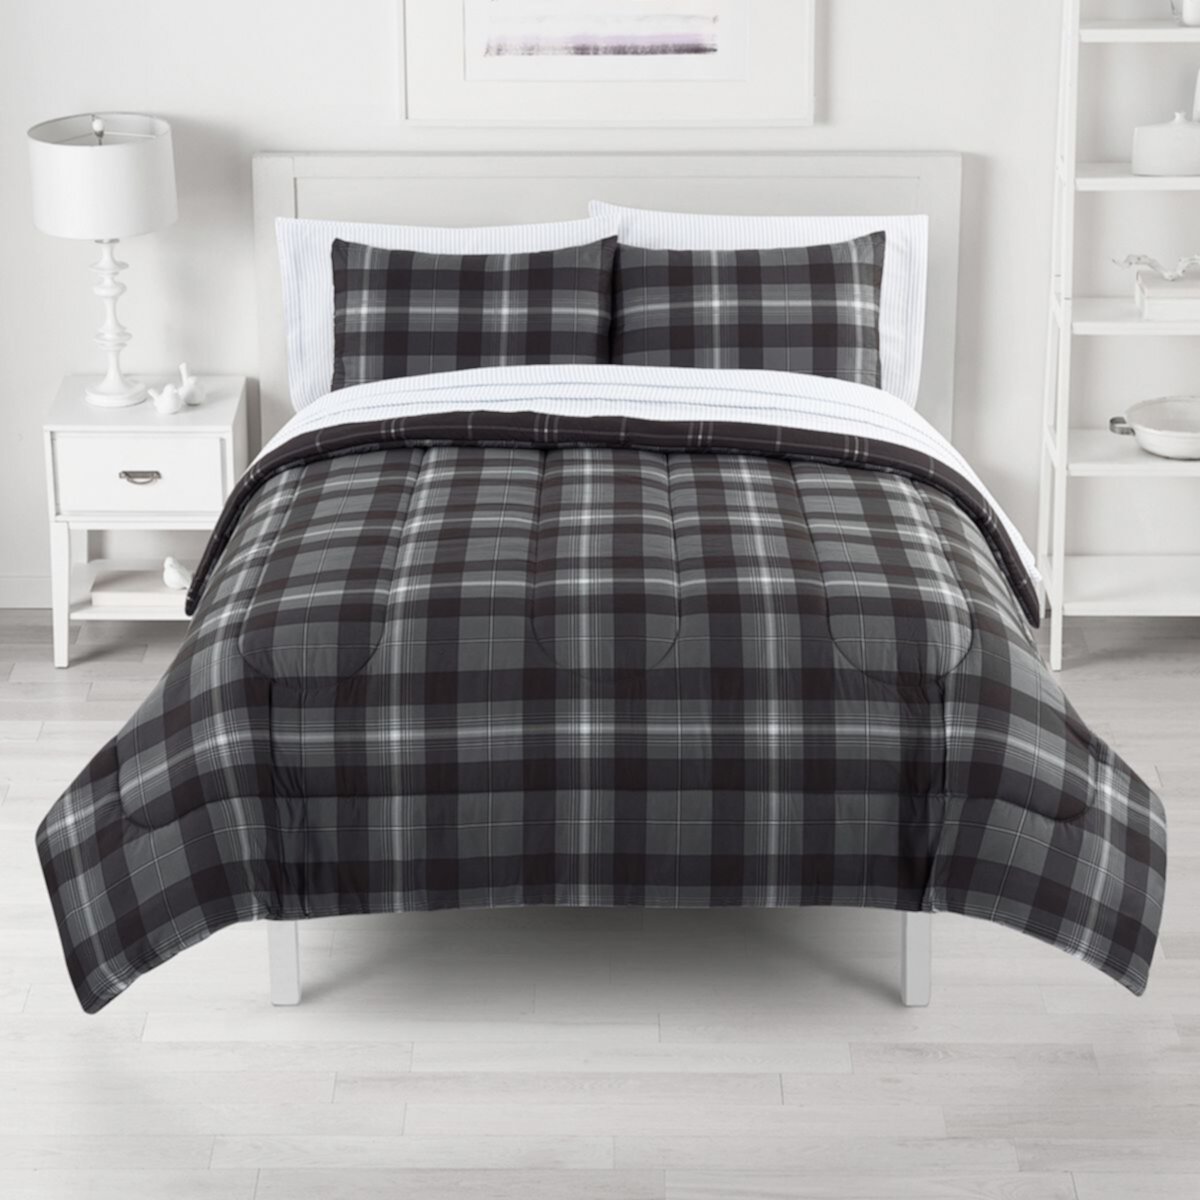 The Big One® Plaid Reversible Comforter Set with Sheets - Twin XL The Big One